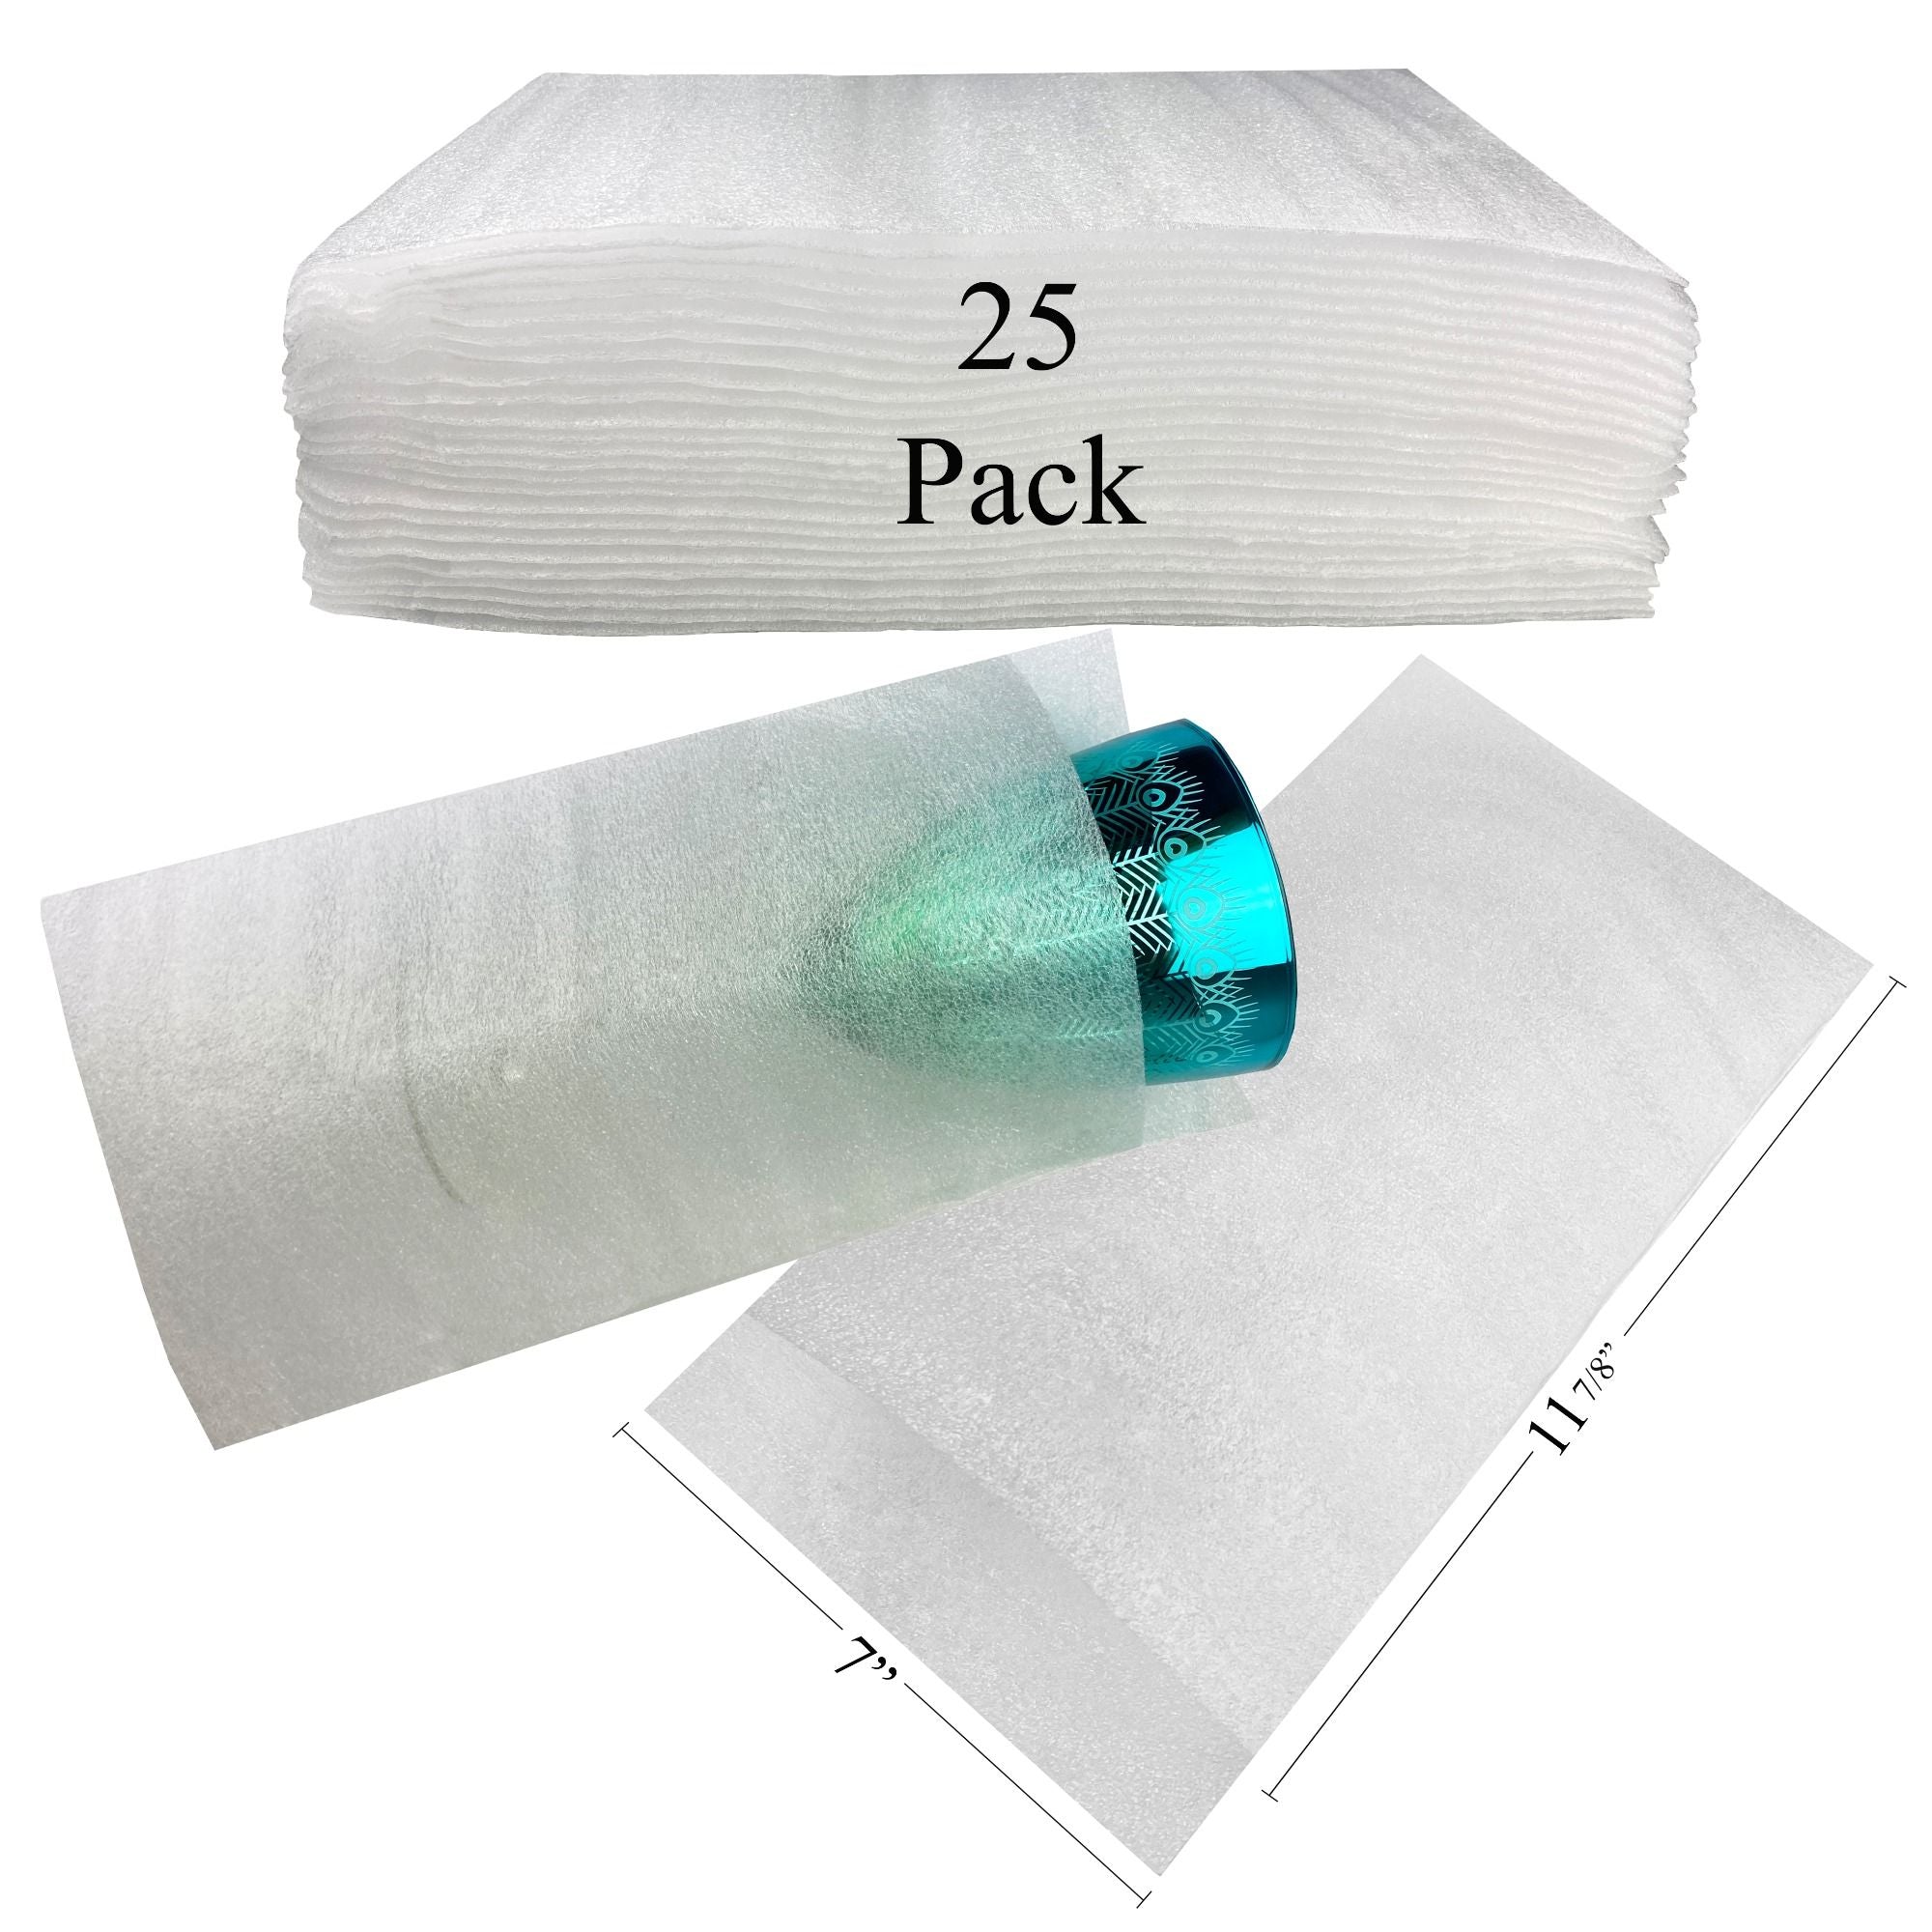 NEW Foam Pouches - Pack of 25